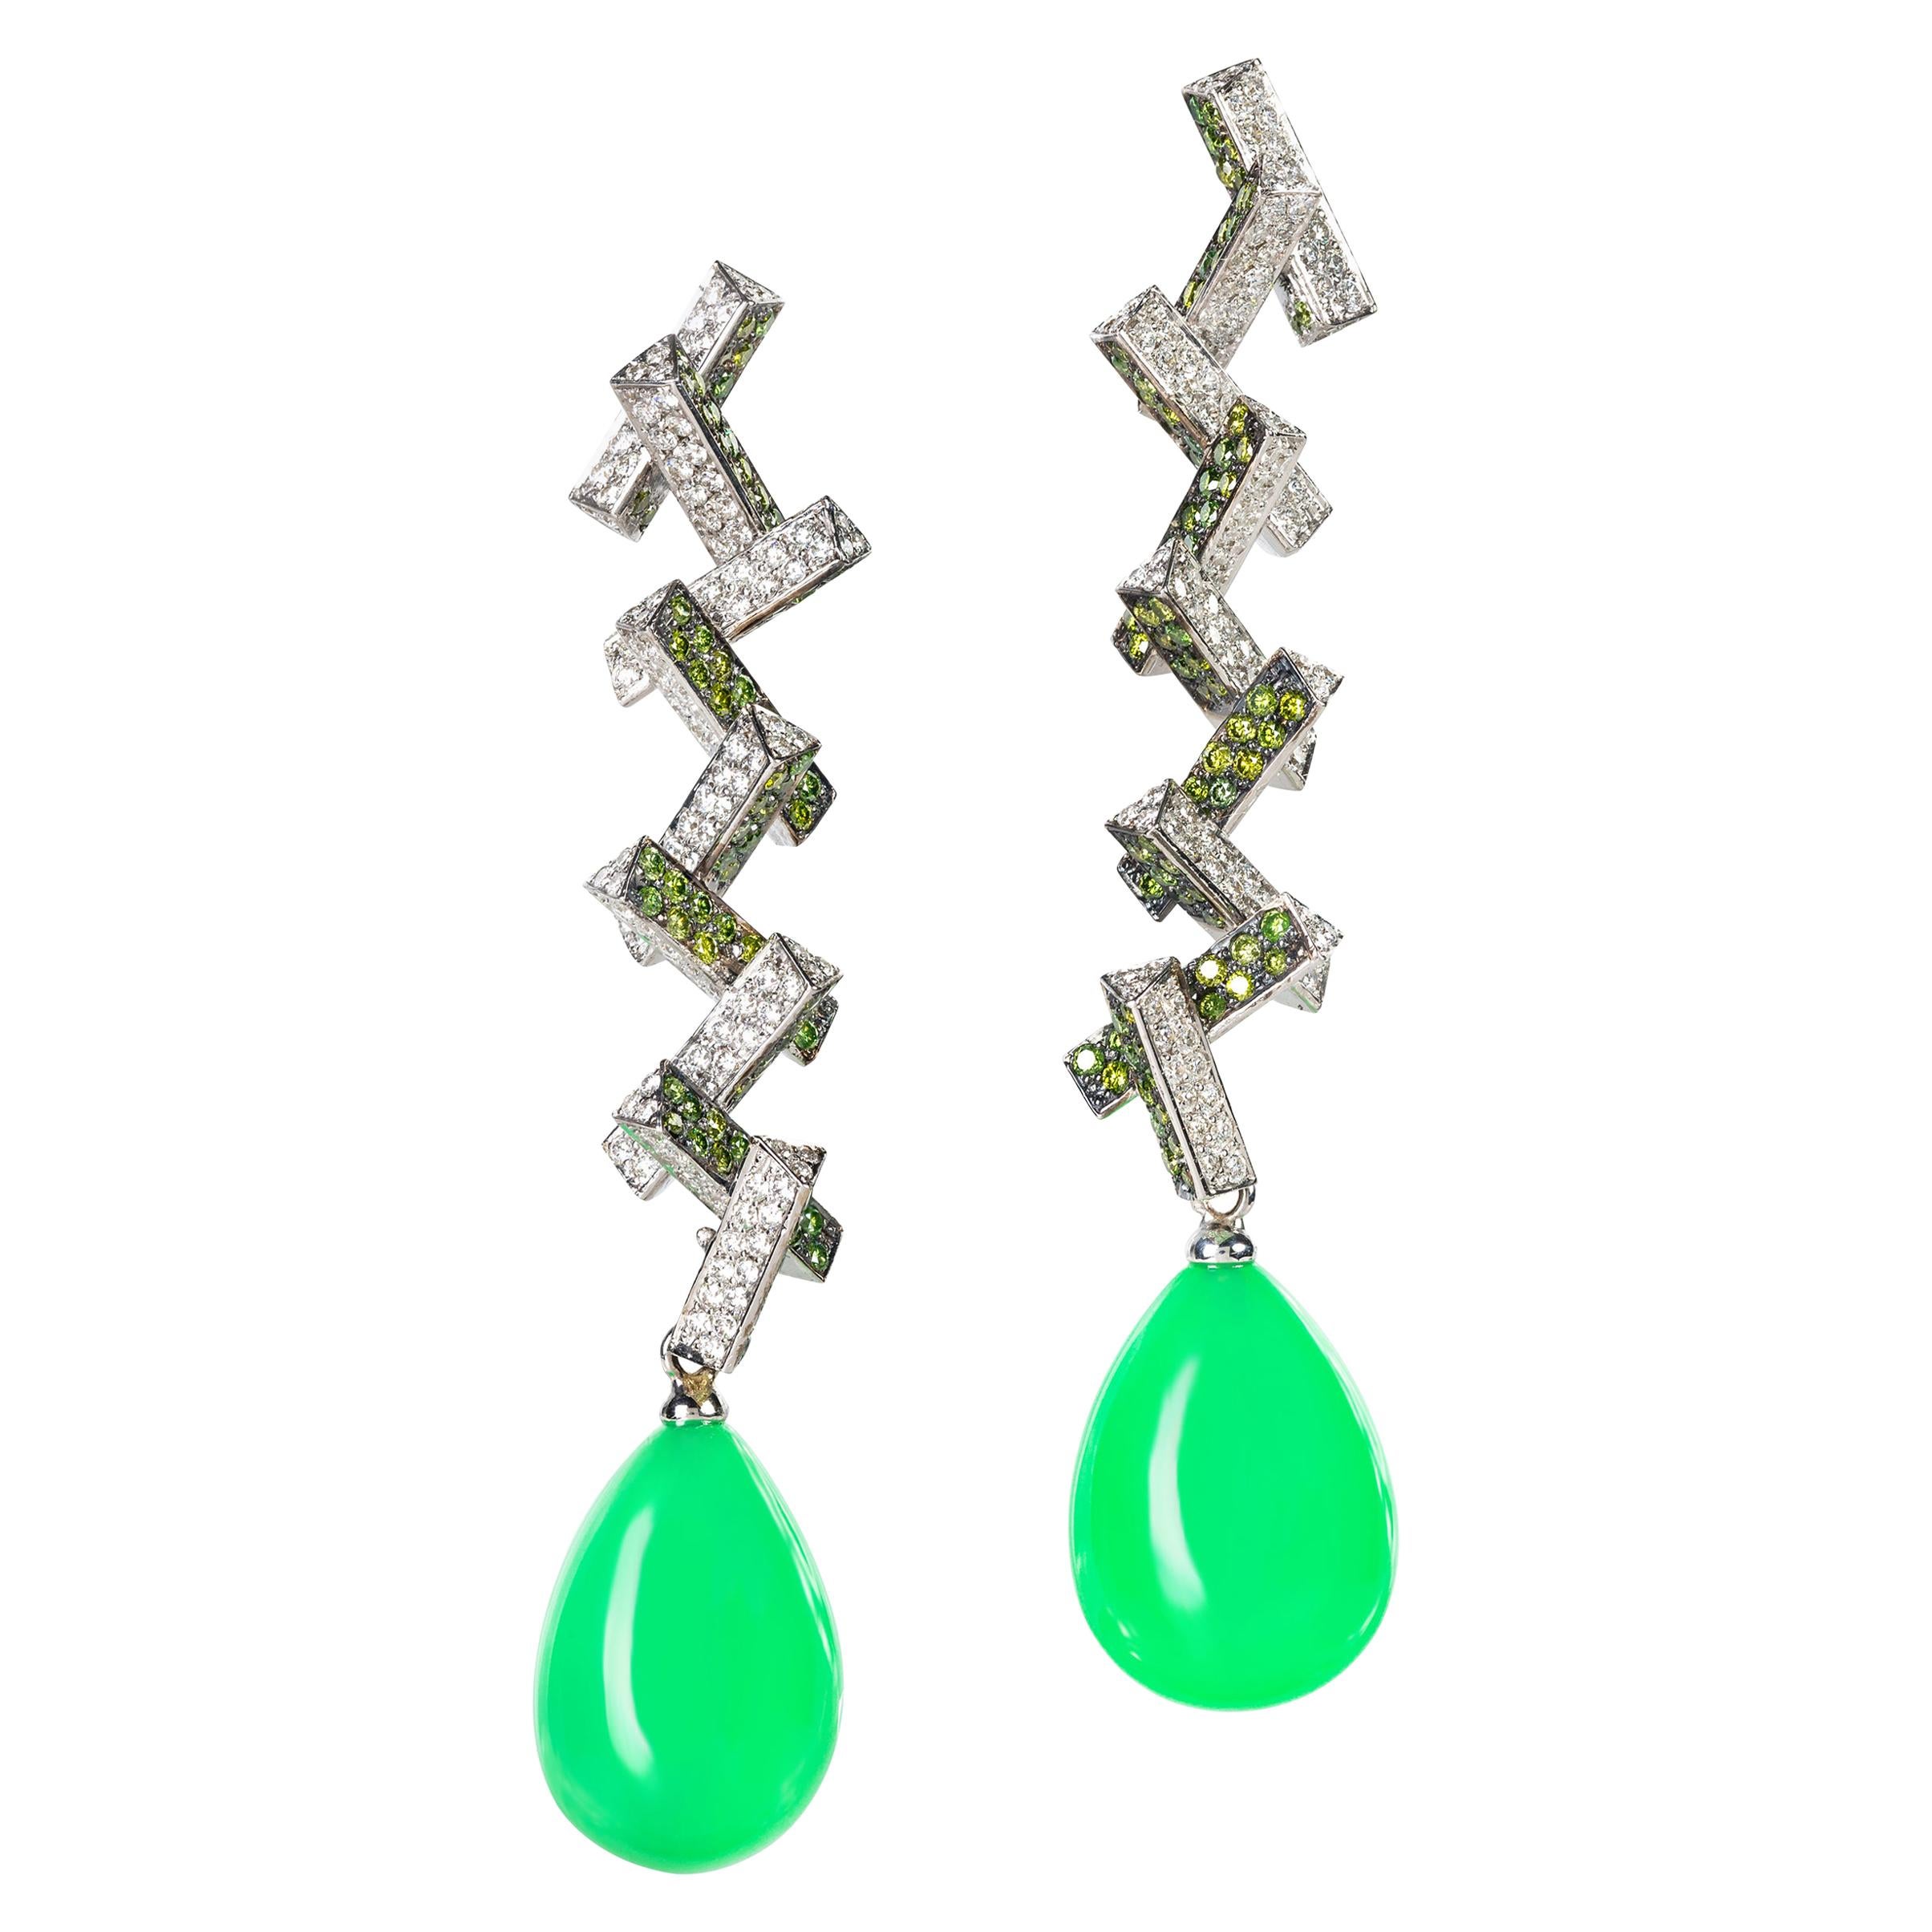 Rosior one-off "Detachable" Opal and Diamond Drop Earrings set in White Gold